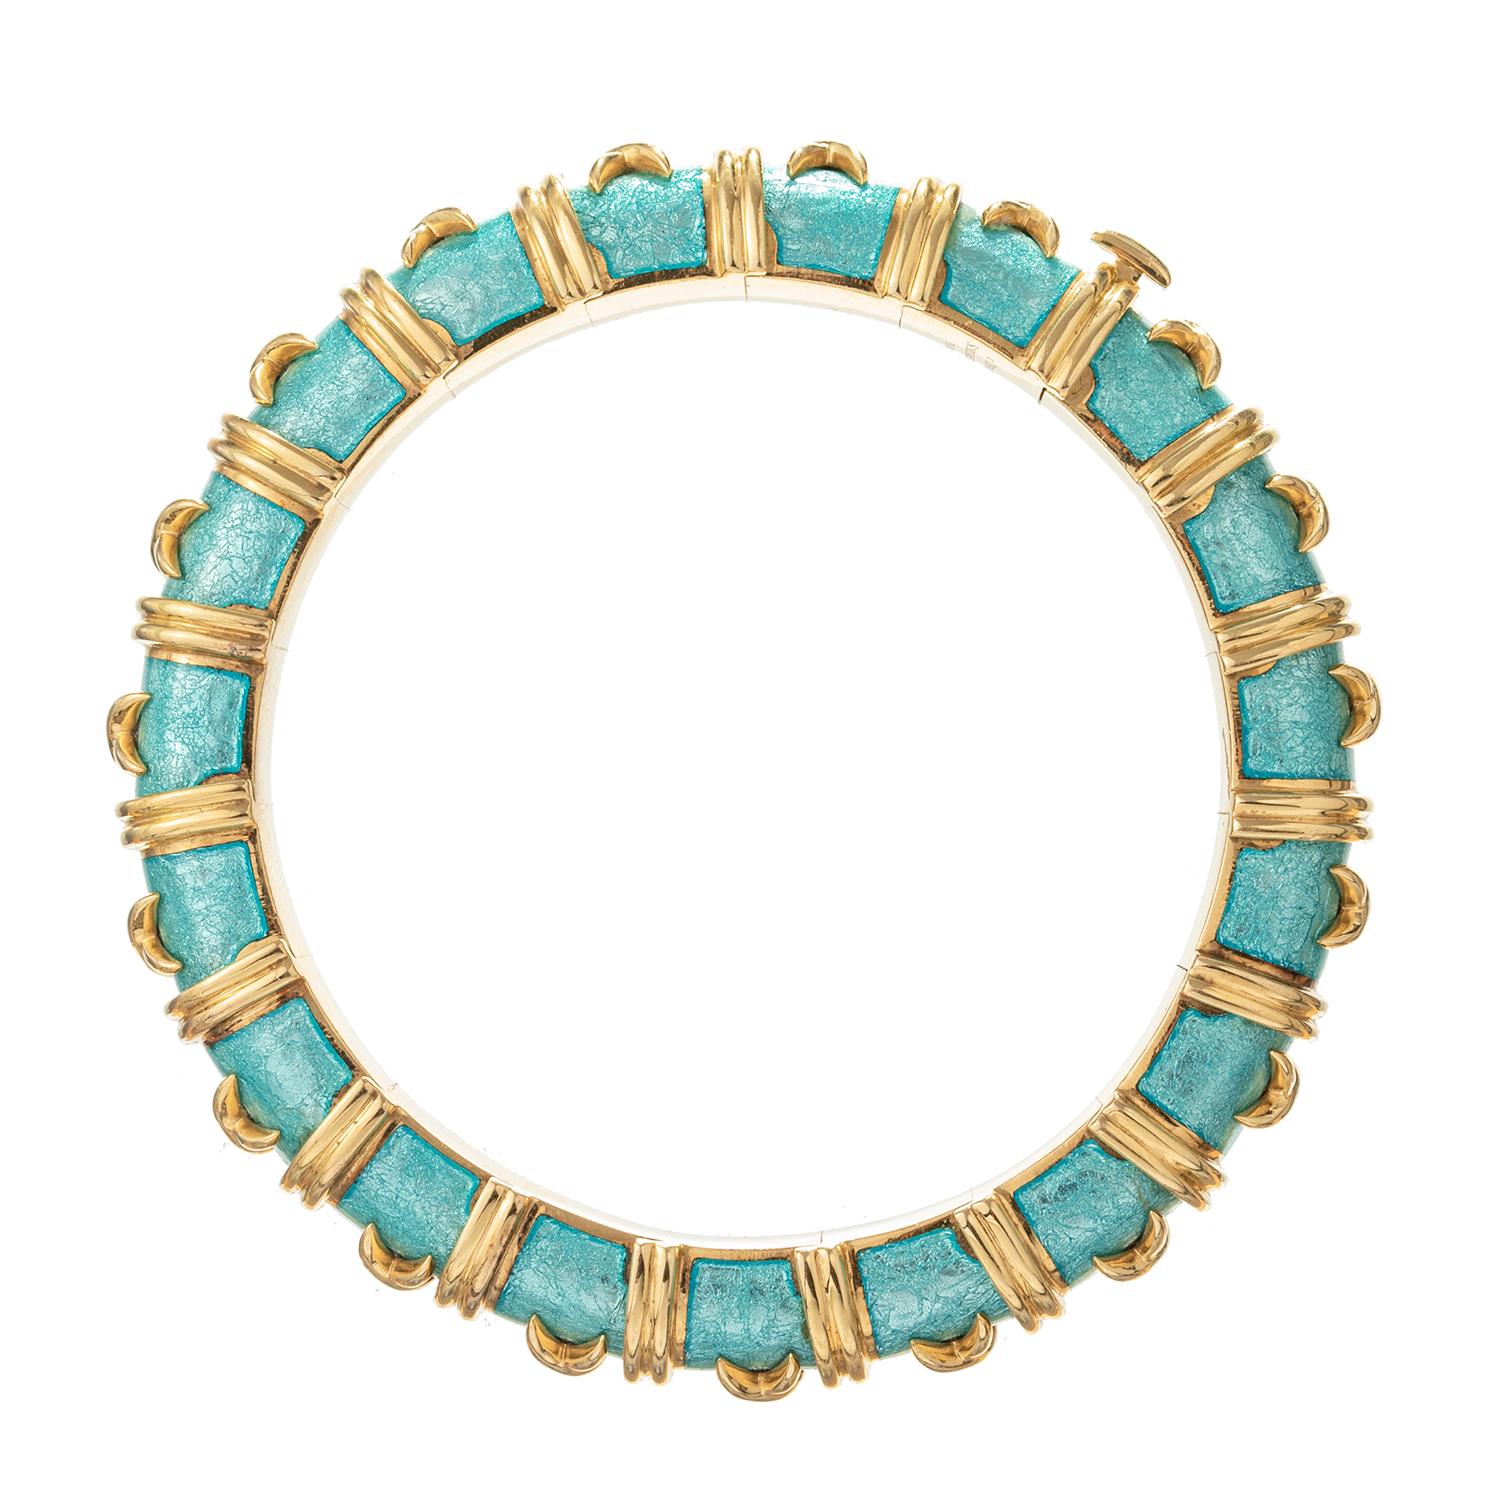 A timeless 18 karat yellow gold and azure enamel 'Croisillon' bracelet designed by Schlumberger for Tiffany & Co.  The finely articulated azure paillonné enamel bangle has applied cross-shaped gold details with reeded band spacers.  Inner